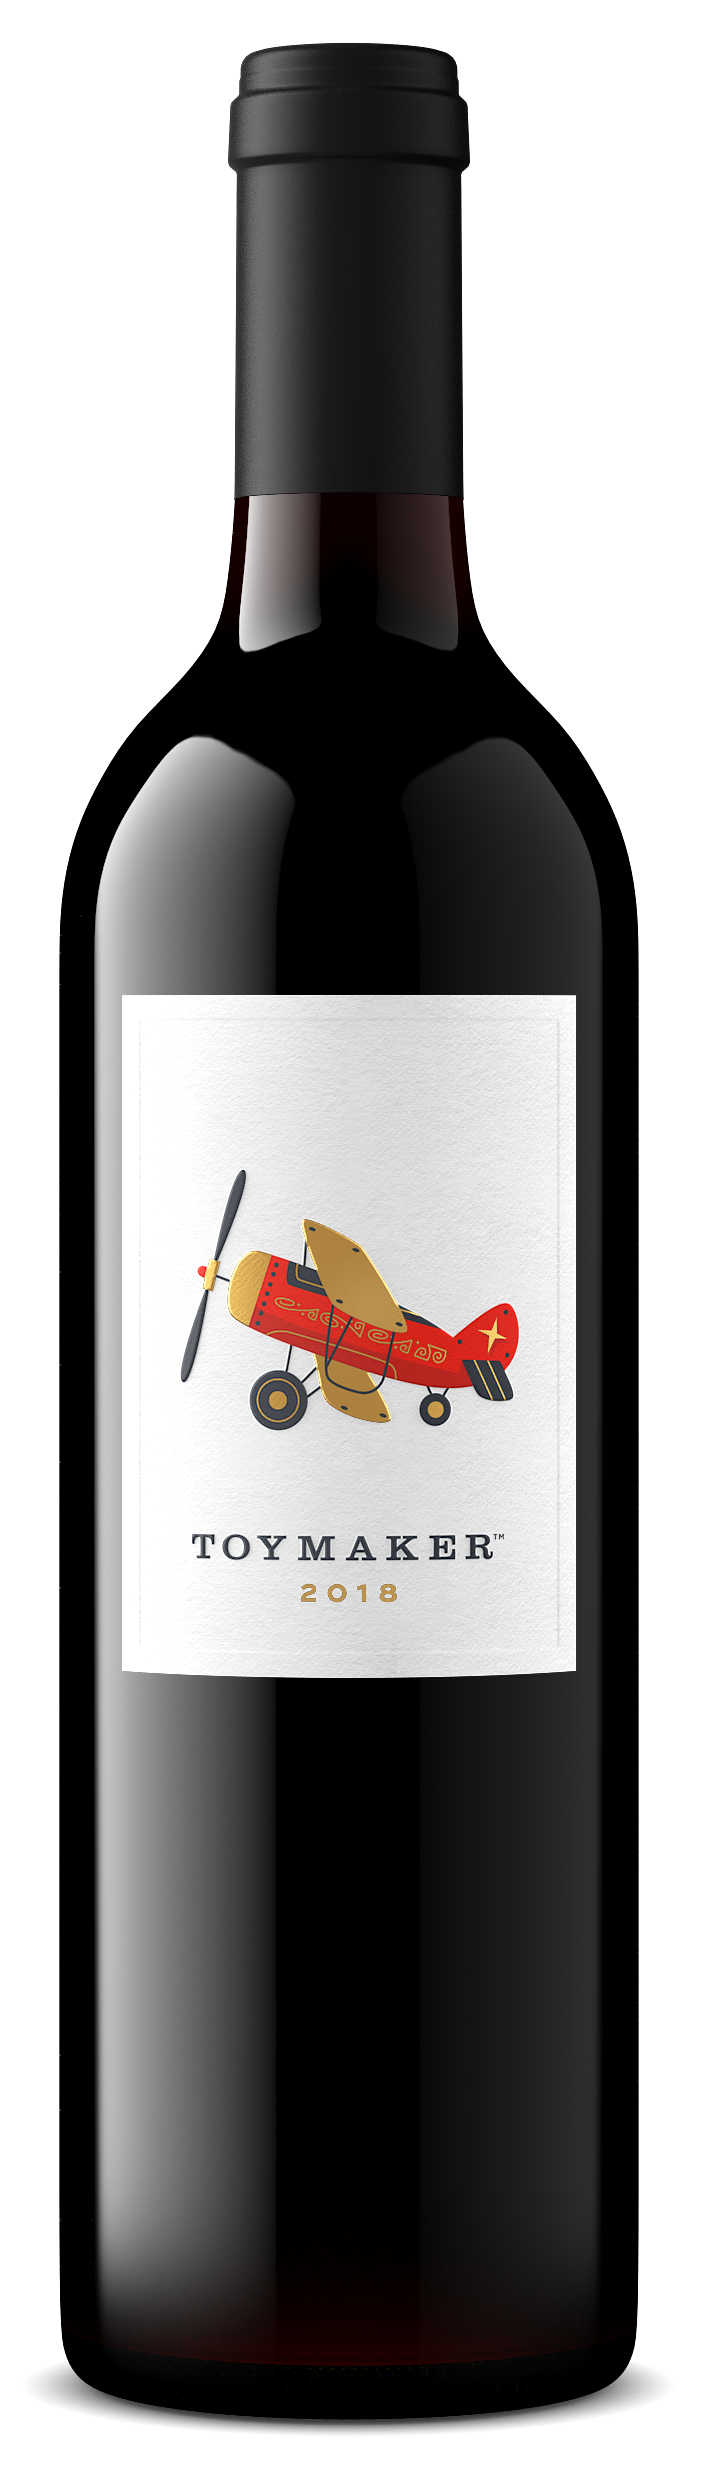 2018 Toymaker Cellars Cabernet Sauvignon Napa Valley Red Wine Label with Toy Train label, made by Napa Valley winemaker Martha McClellan. Rare & limited Grand Cru Napa Valley Cabernet Sauvignon. Made by Martha McClellan, Martha McClellan, Martha McClellan, Martha McClellan, Martha McClellan, Martha McClellan, Martha McClellan, Martha McClellan, Martha McClellan, Martha McClellan, Martha McClellan